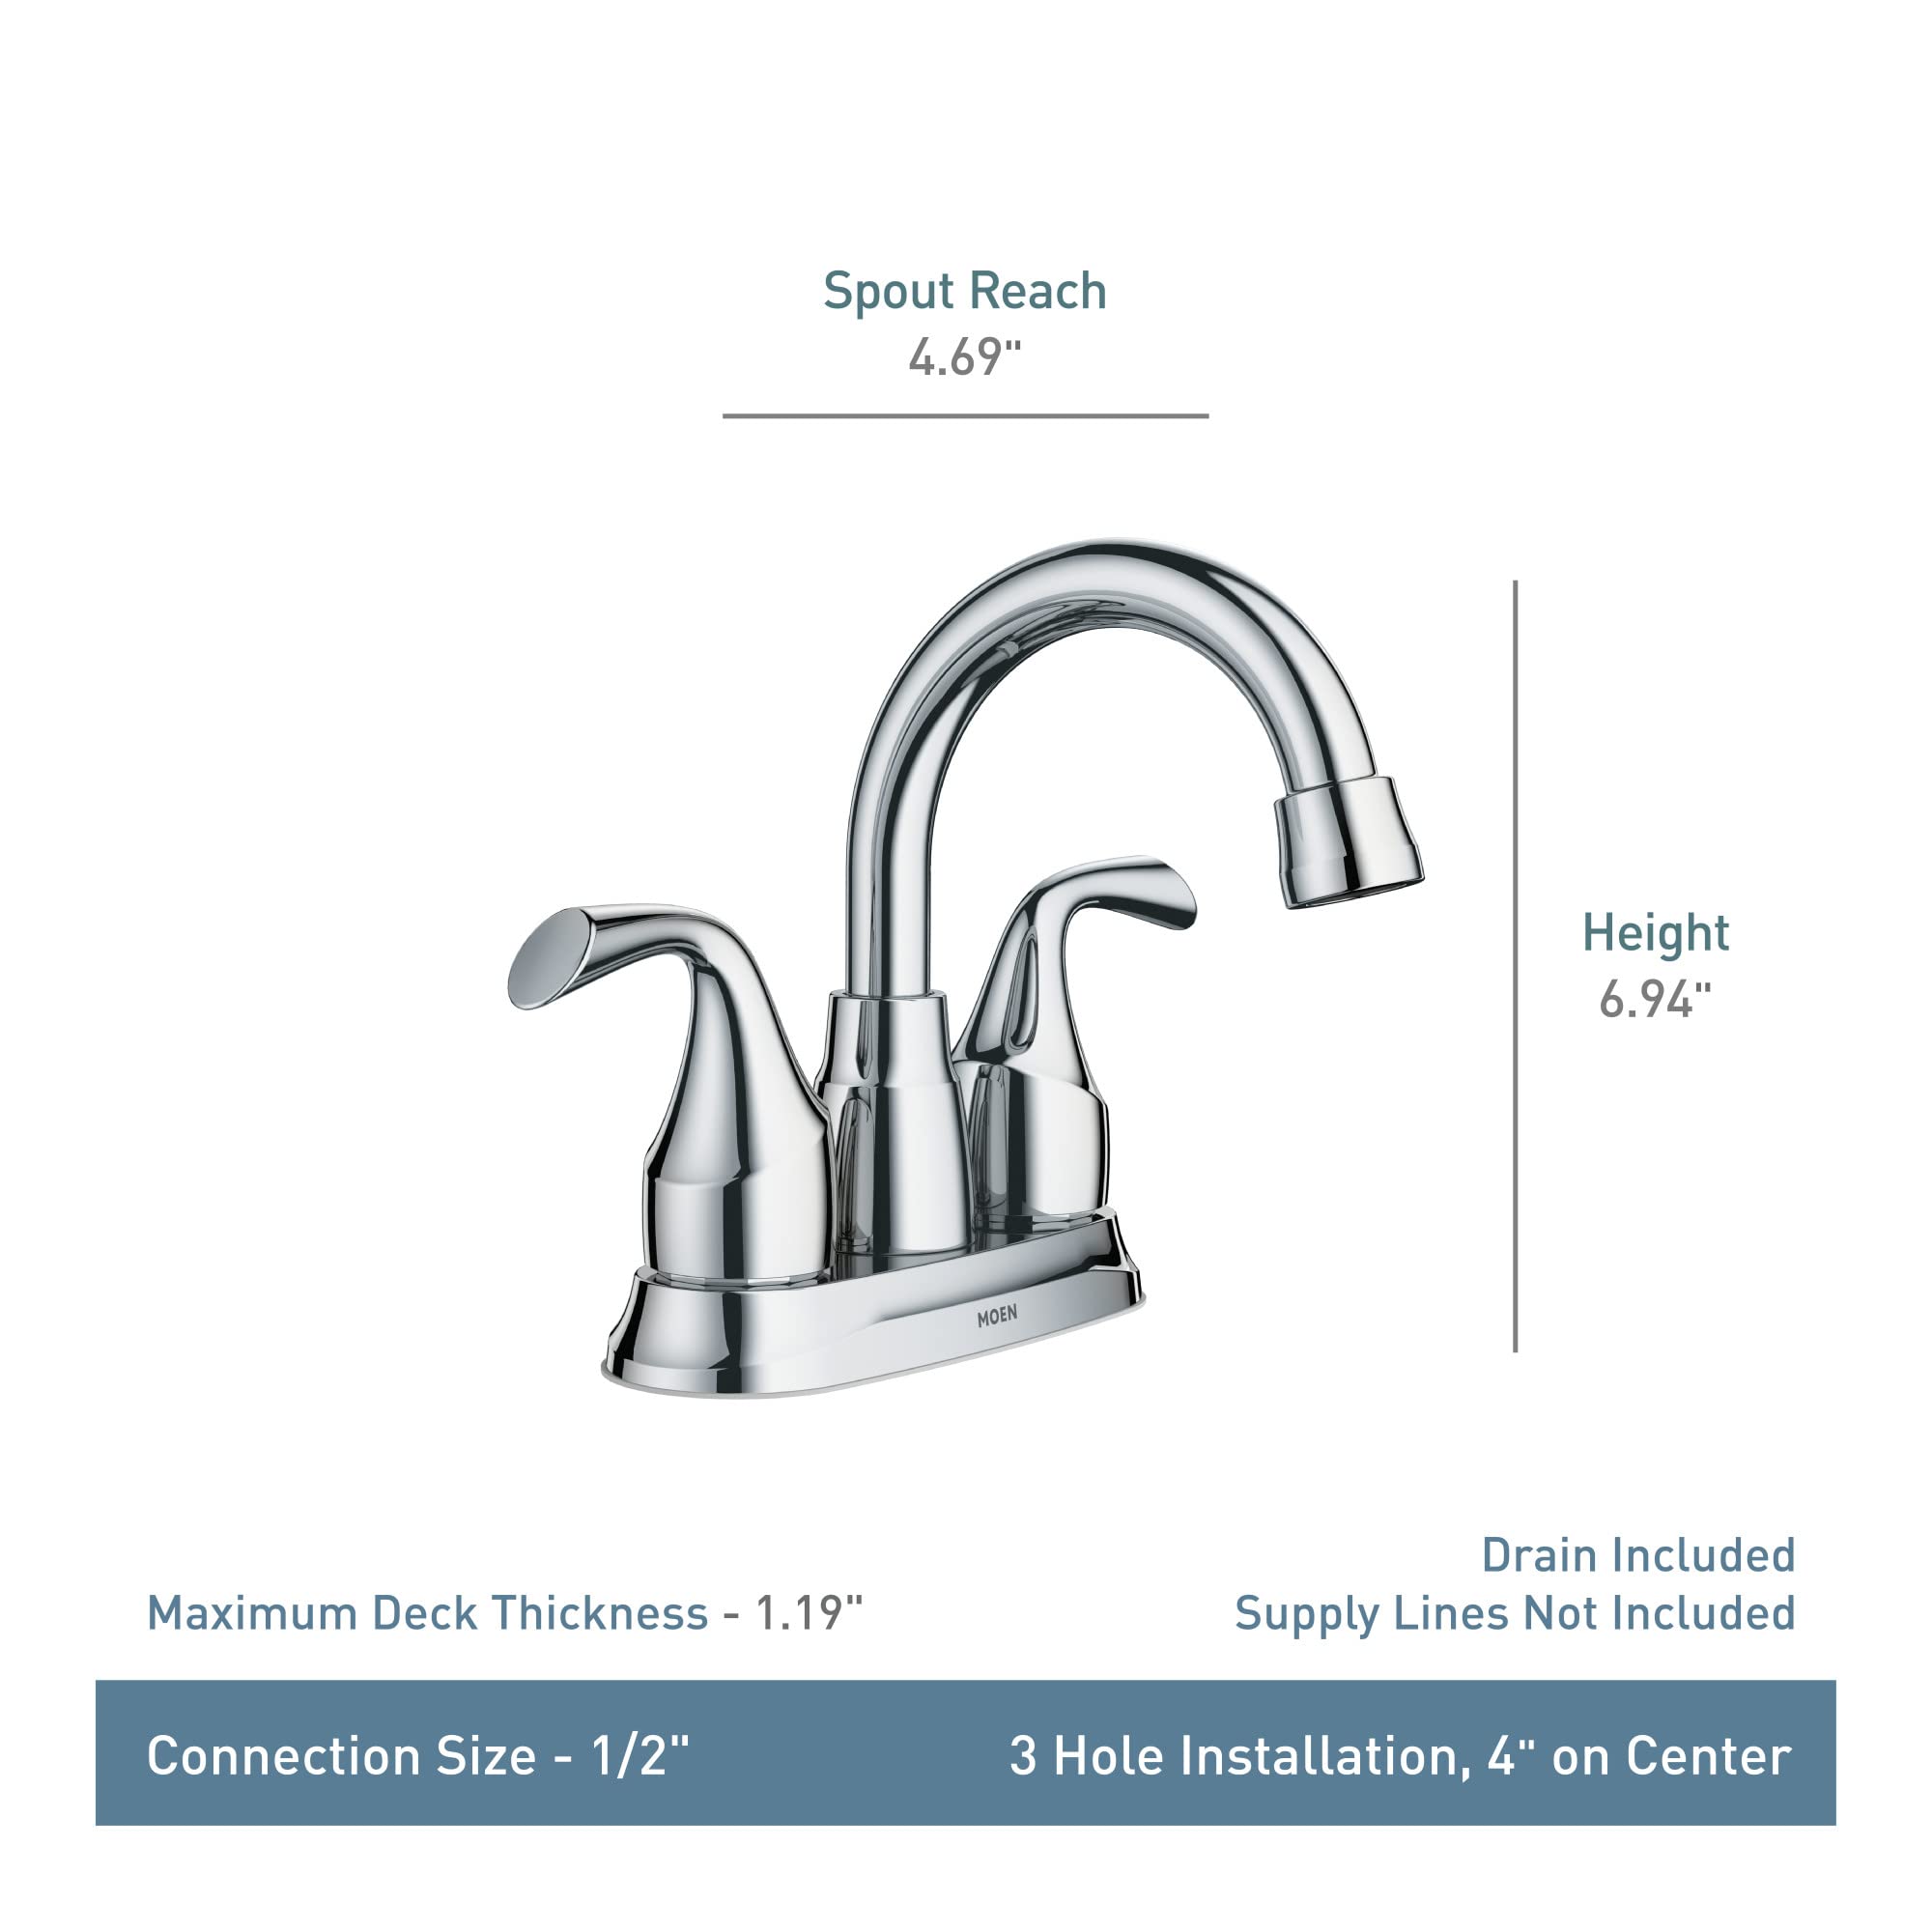 Moen Idora Spot Resist Brushed Nickel Two-Handle Centerset Bathroom Sink Faucet with Drain Assembly, 84115SRN